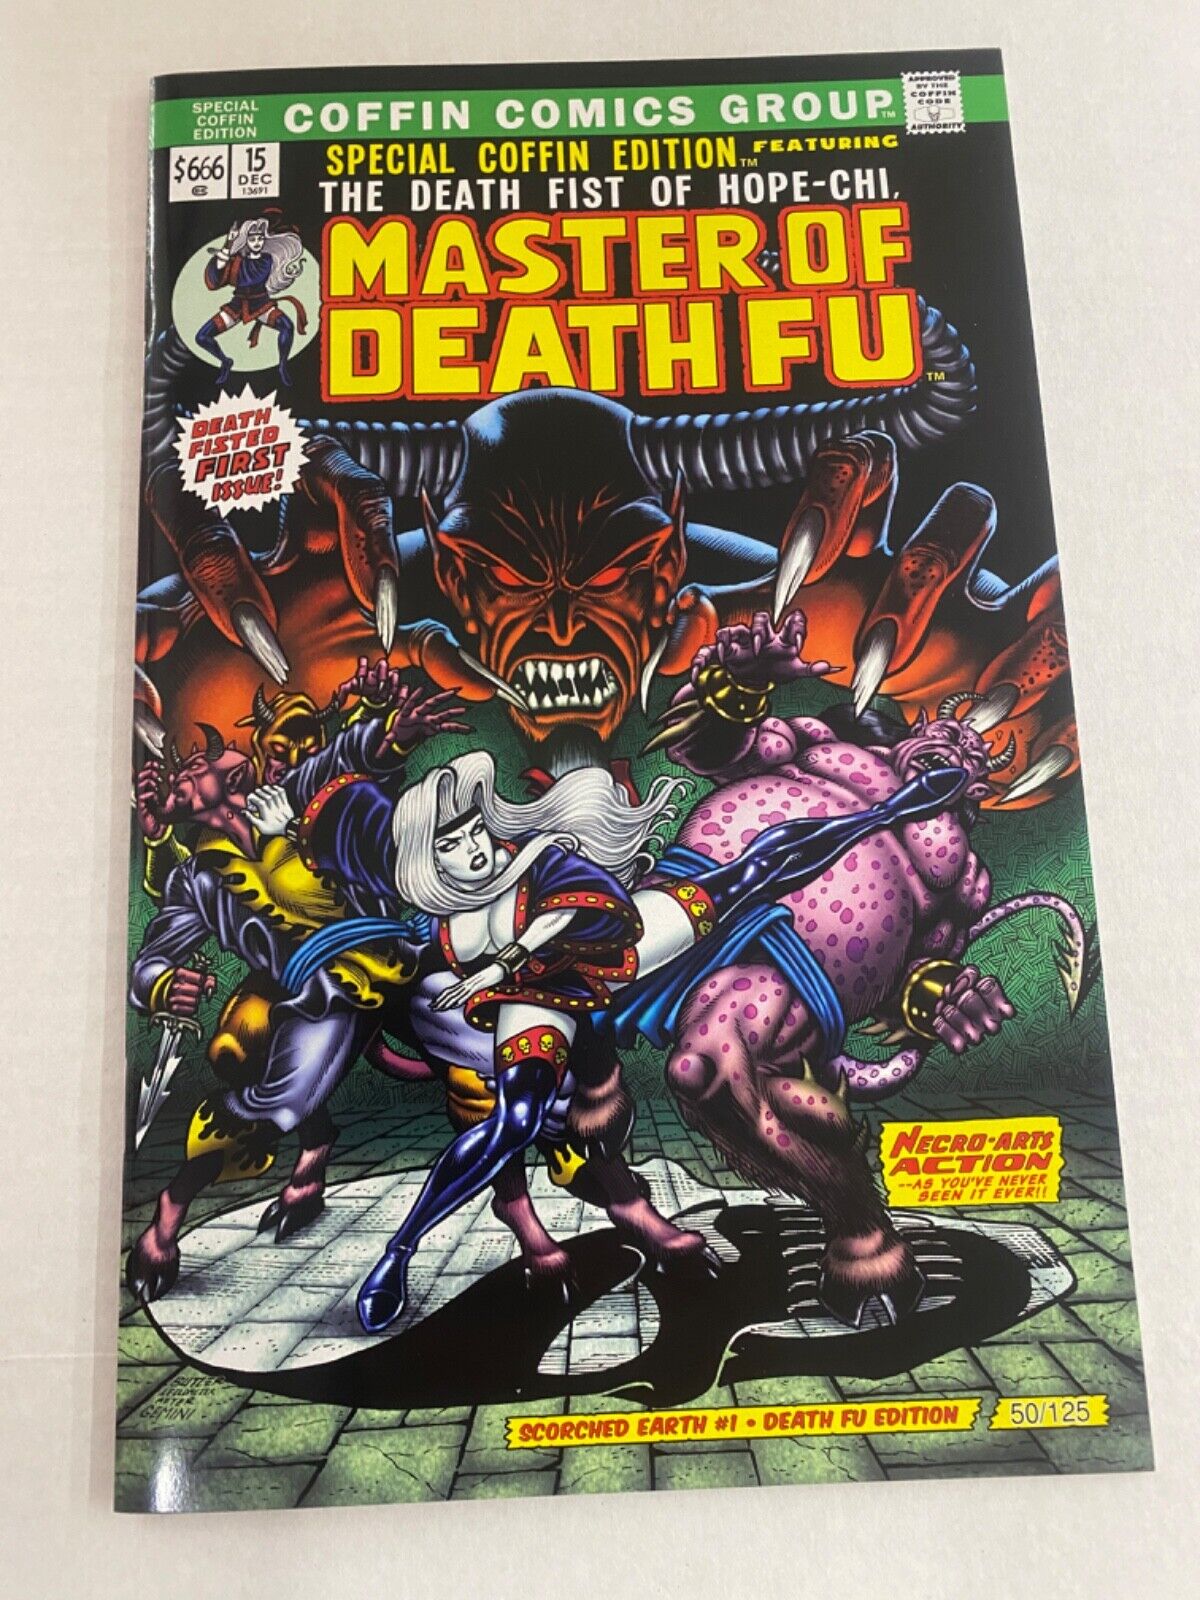 Lady Death Mischief Night #1 - MASTER OF KUNG FU  HOMAGE - LIMITED TO 125